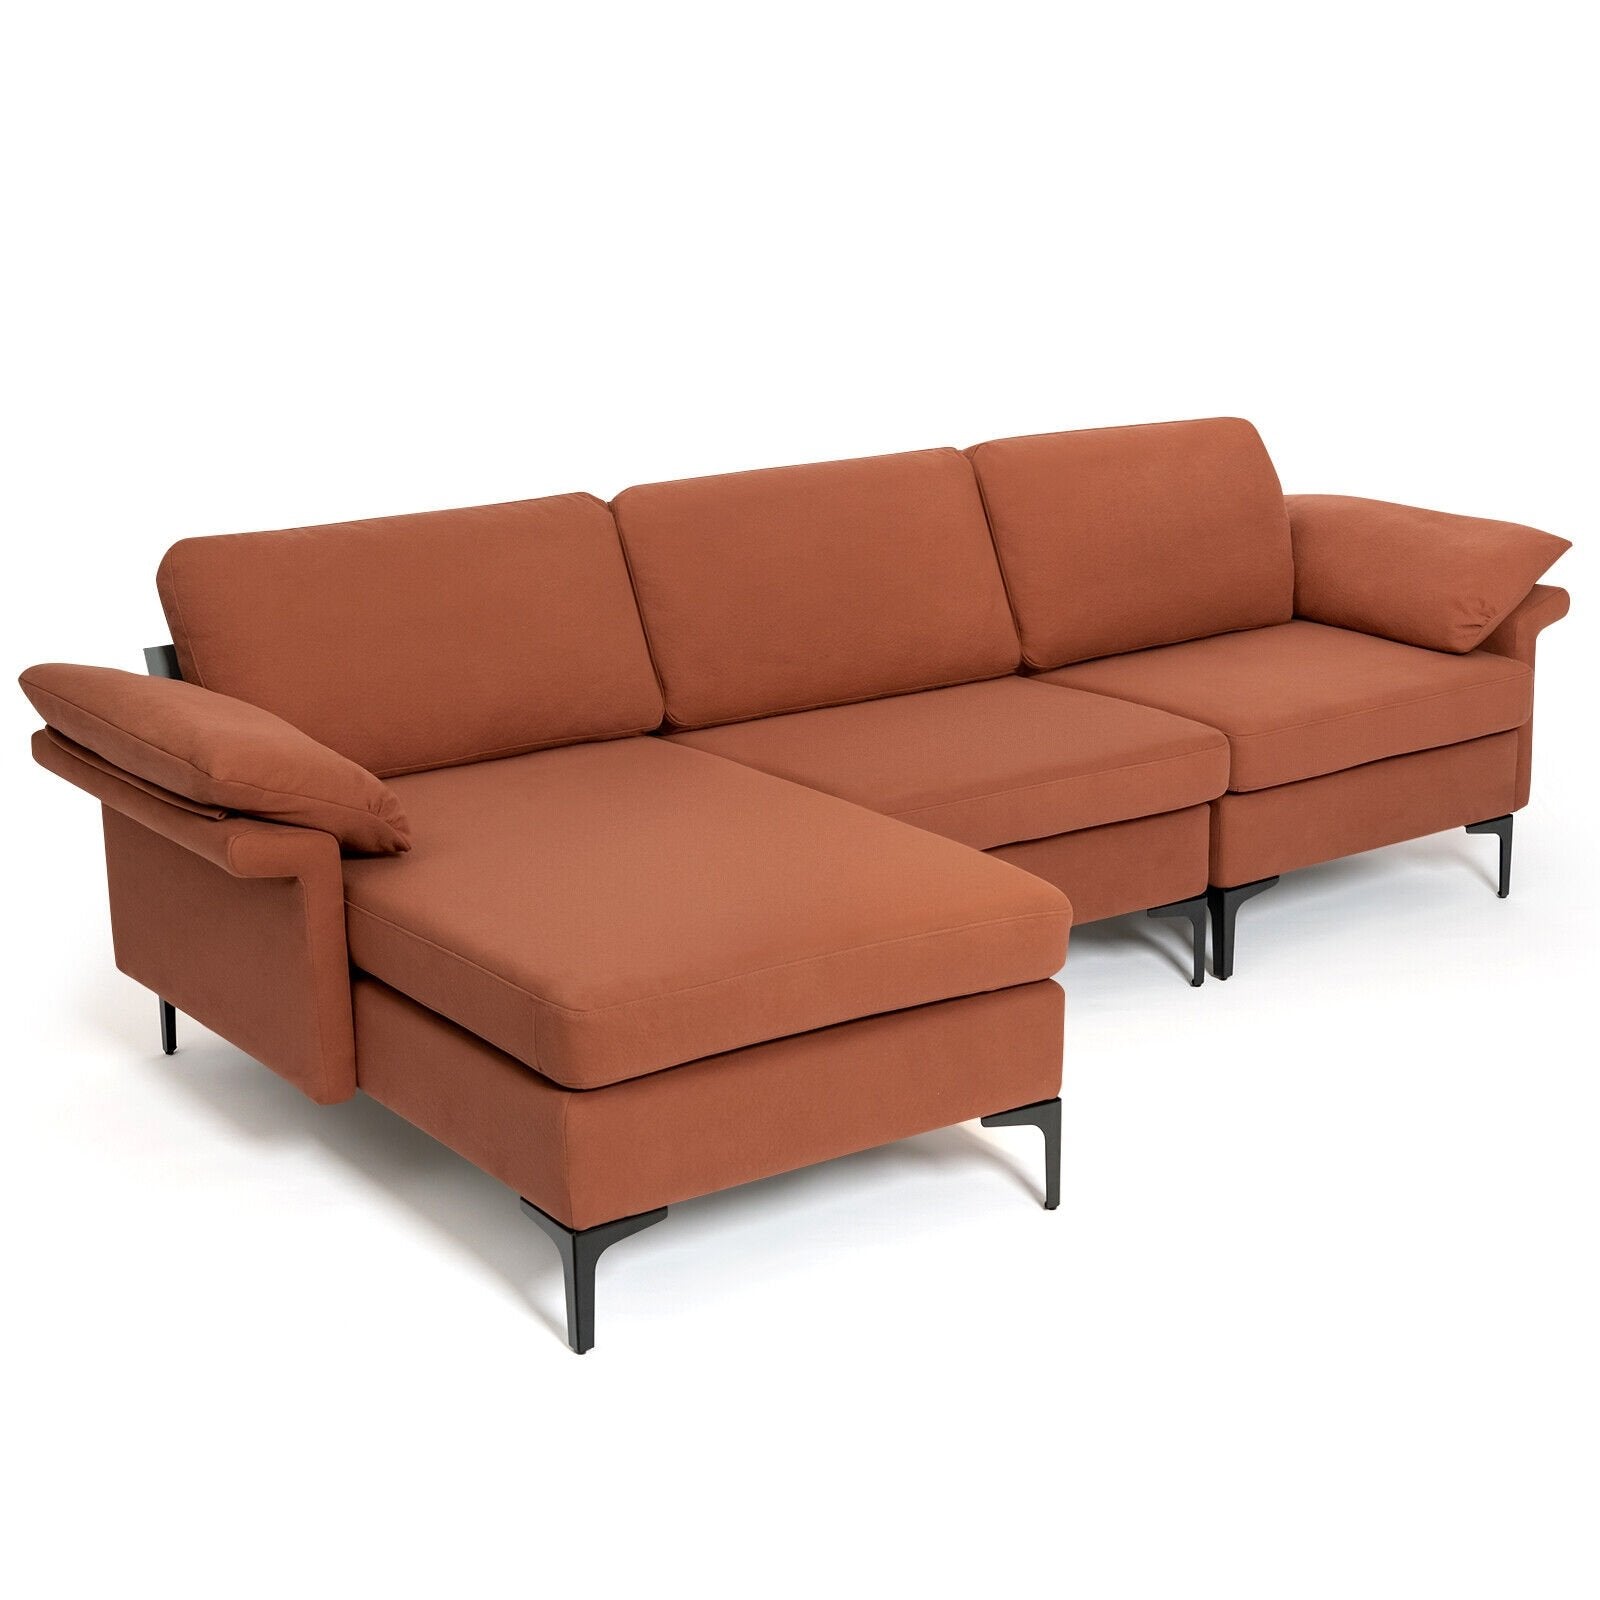 Extra Large Modular L-shaped Sectional Sofa with Reversible Chaise for 4-5 People-Rust Red, Red - Gallery Canada